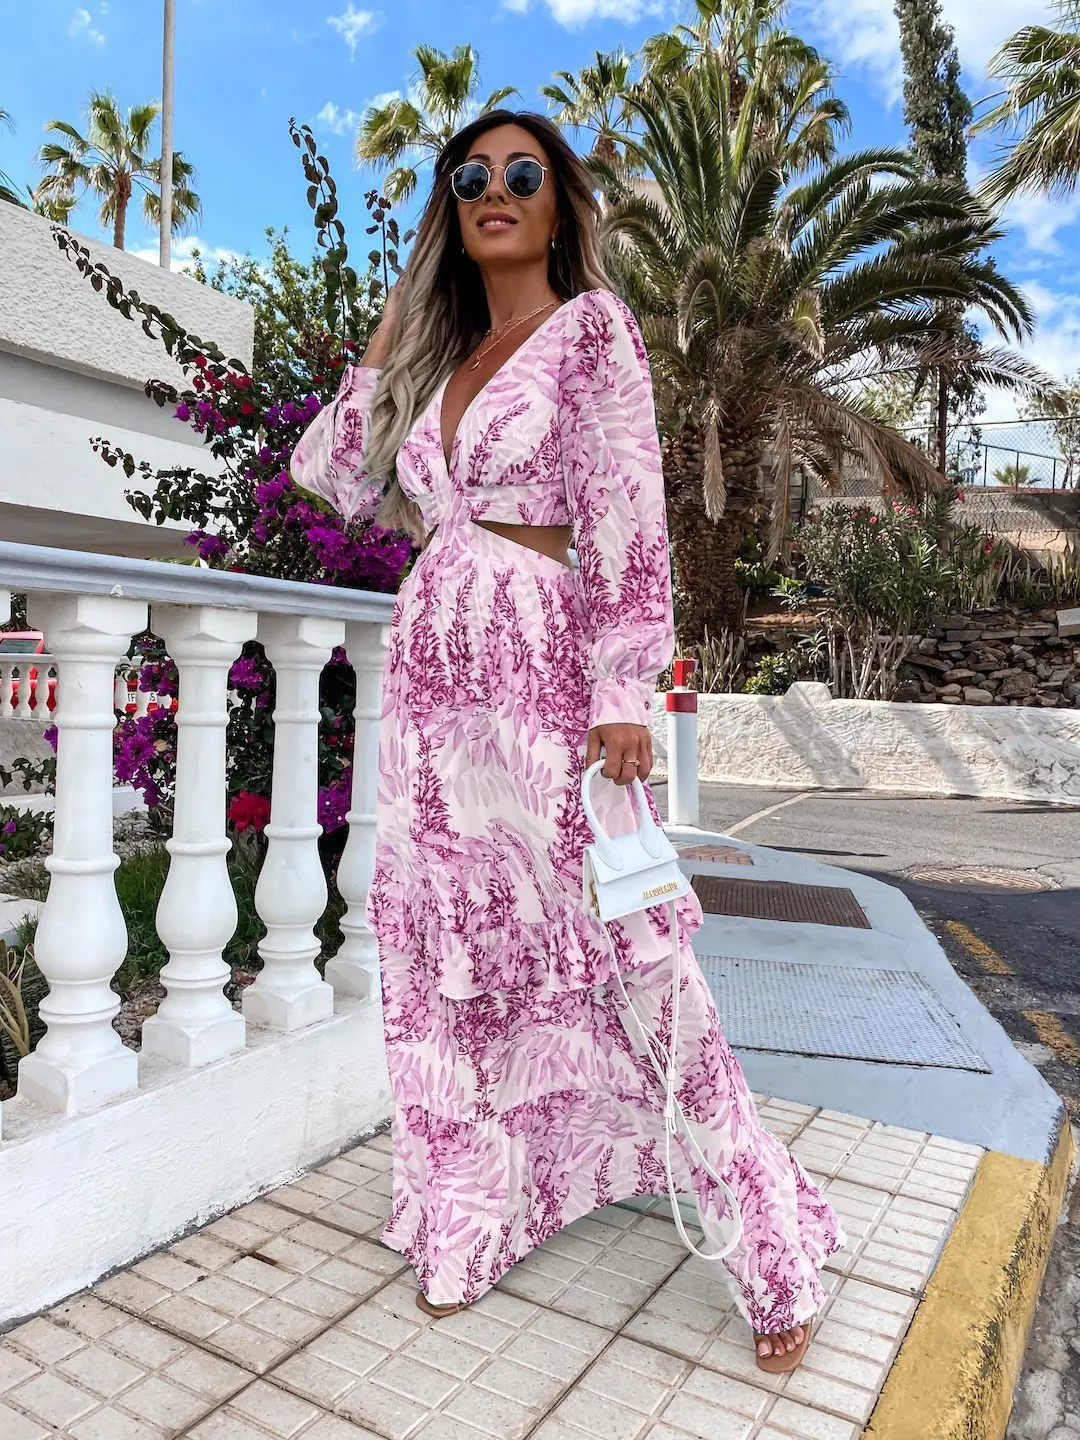 Sexy V-Neck Backless Hollow Out Dress Lantern Sleeve Club Party Long Maxi Dresses Tunic Beach Cover Up A939